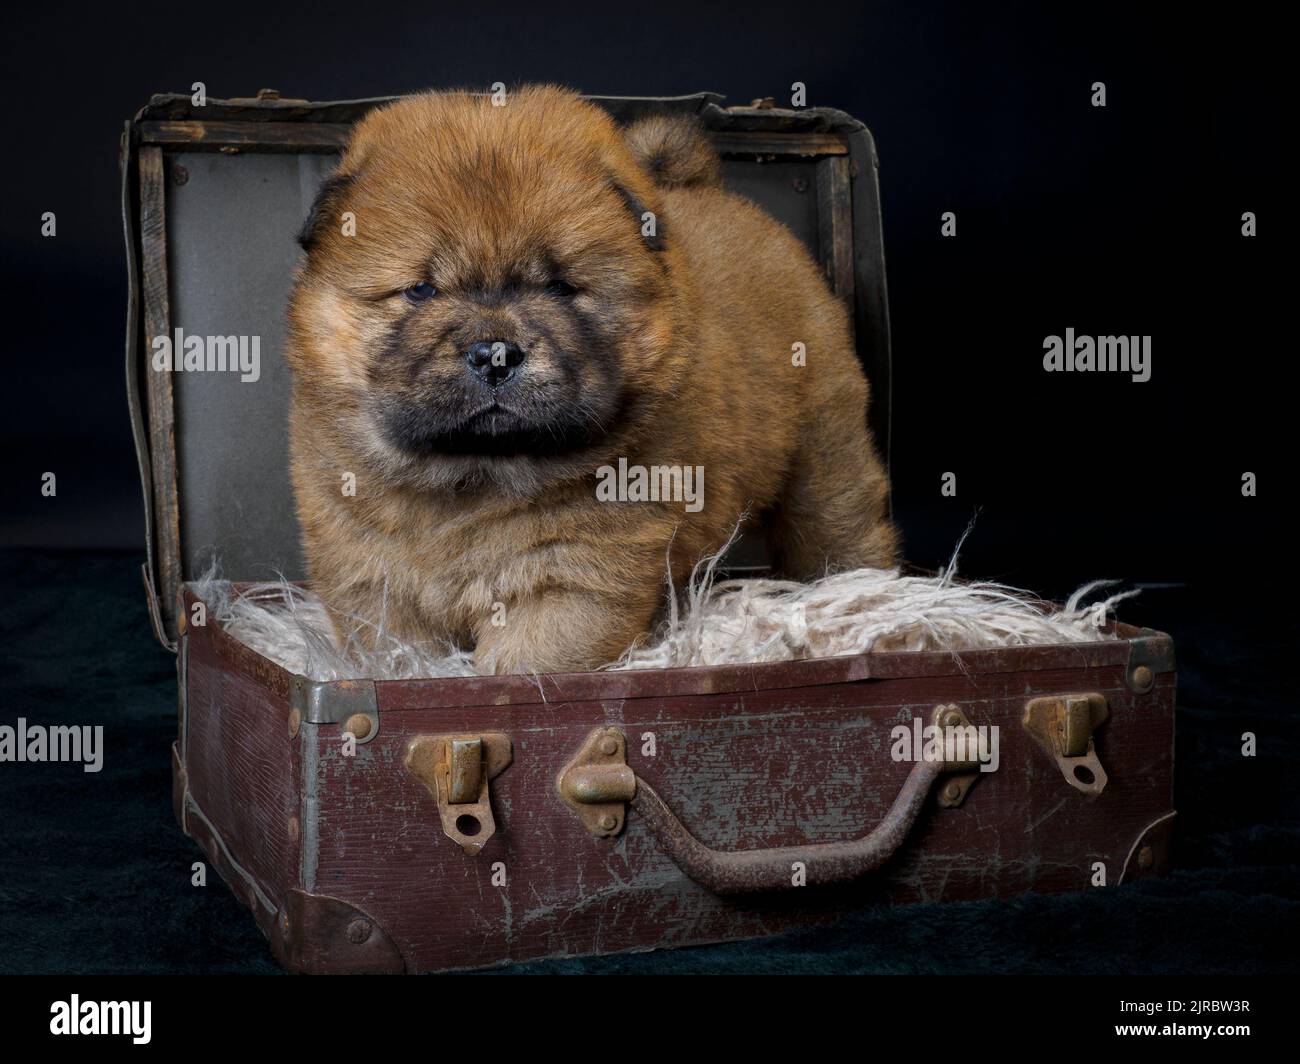 Female Chow Chow puppy in an old suitcase. Stock Photo